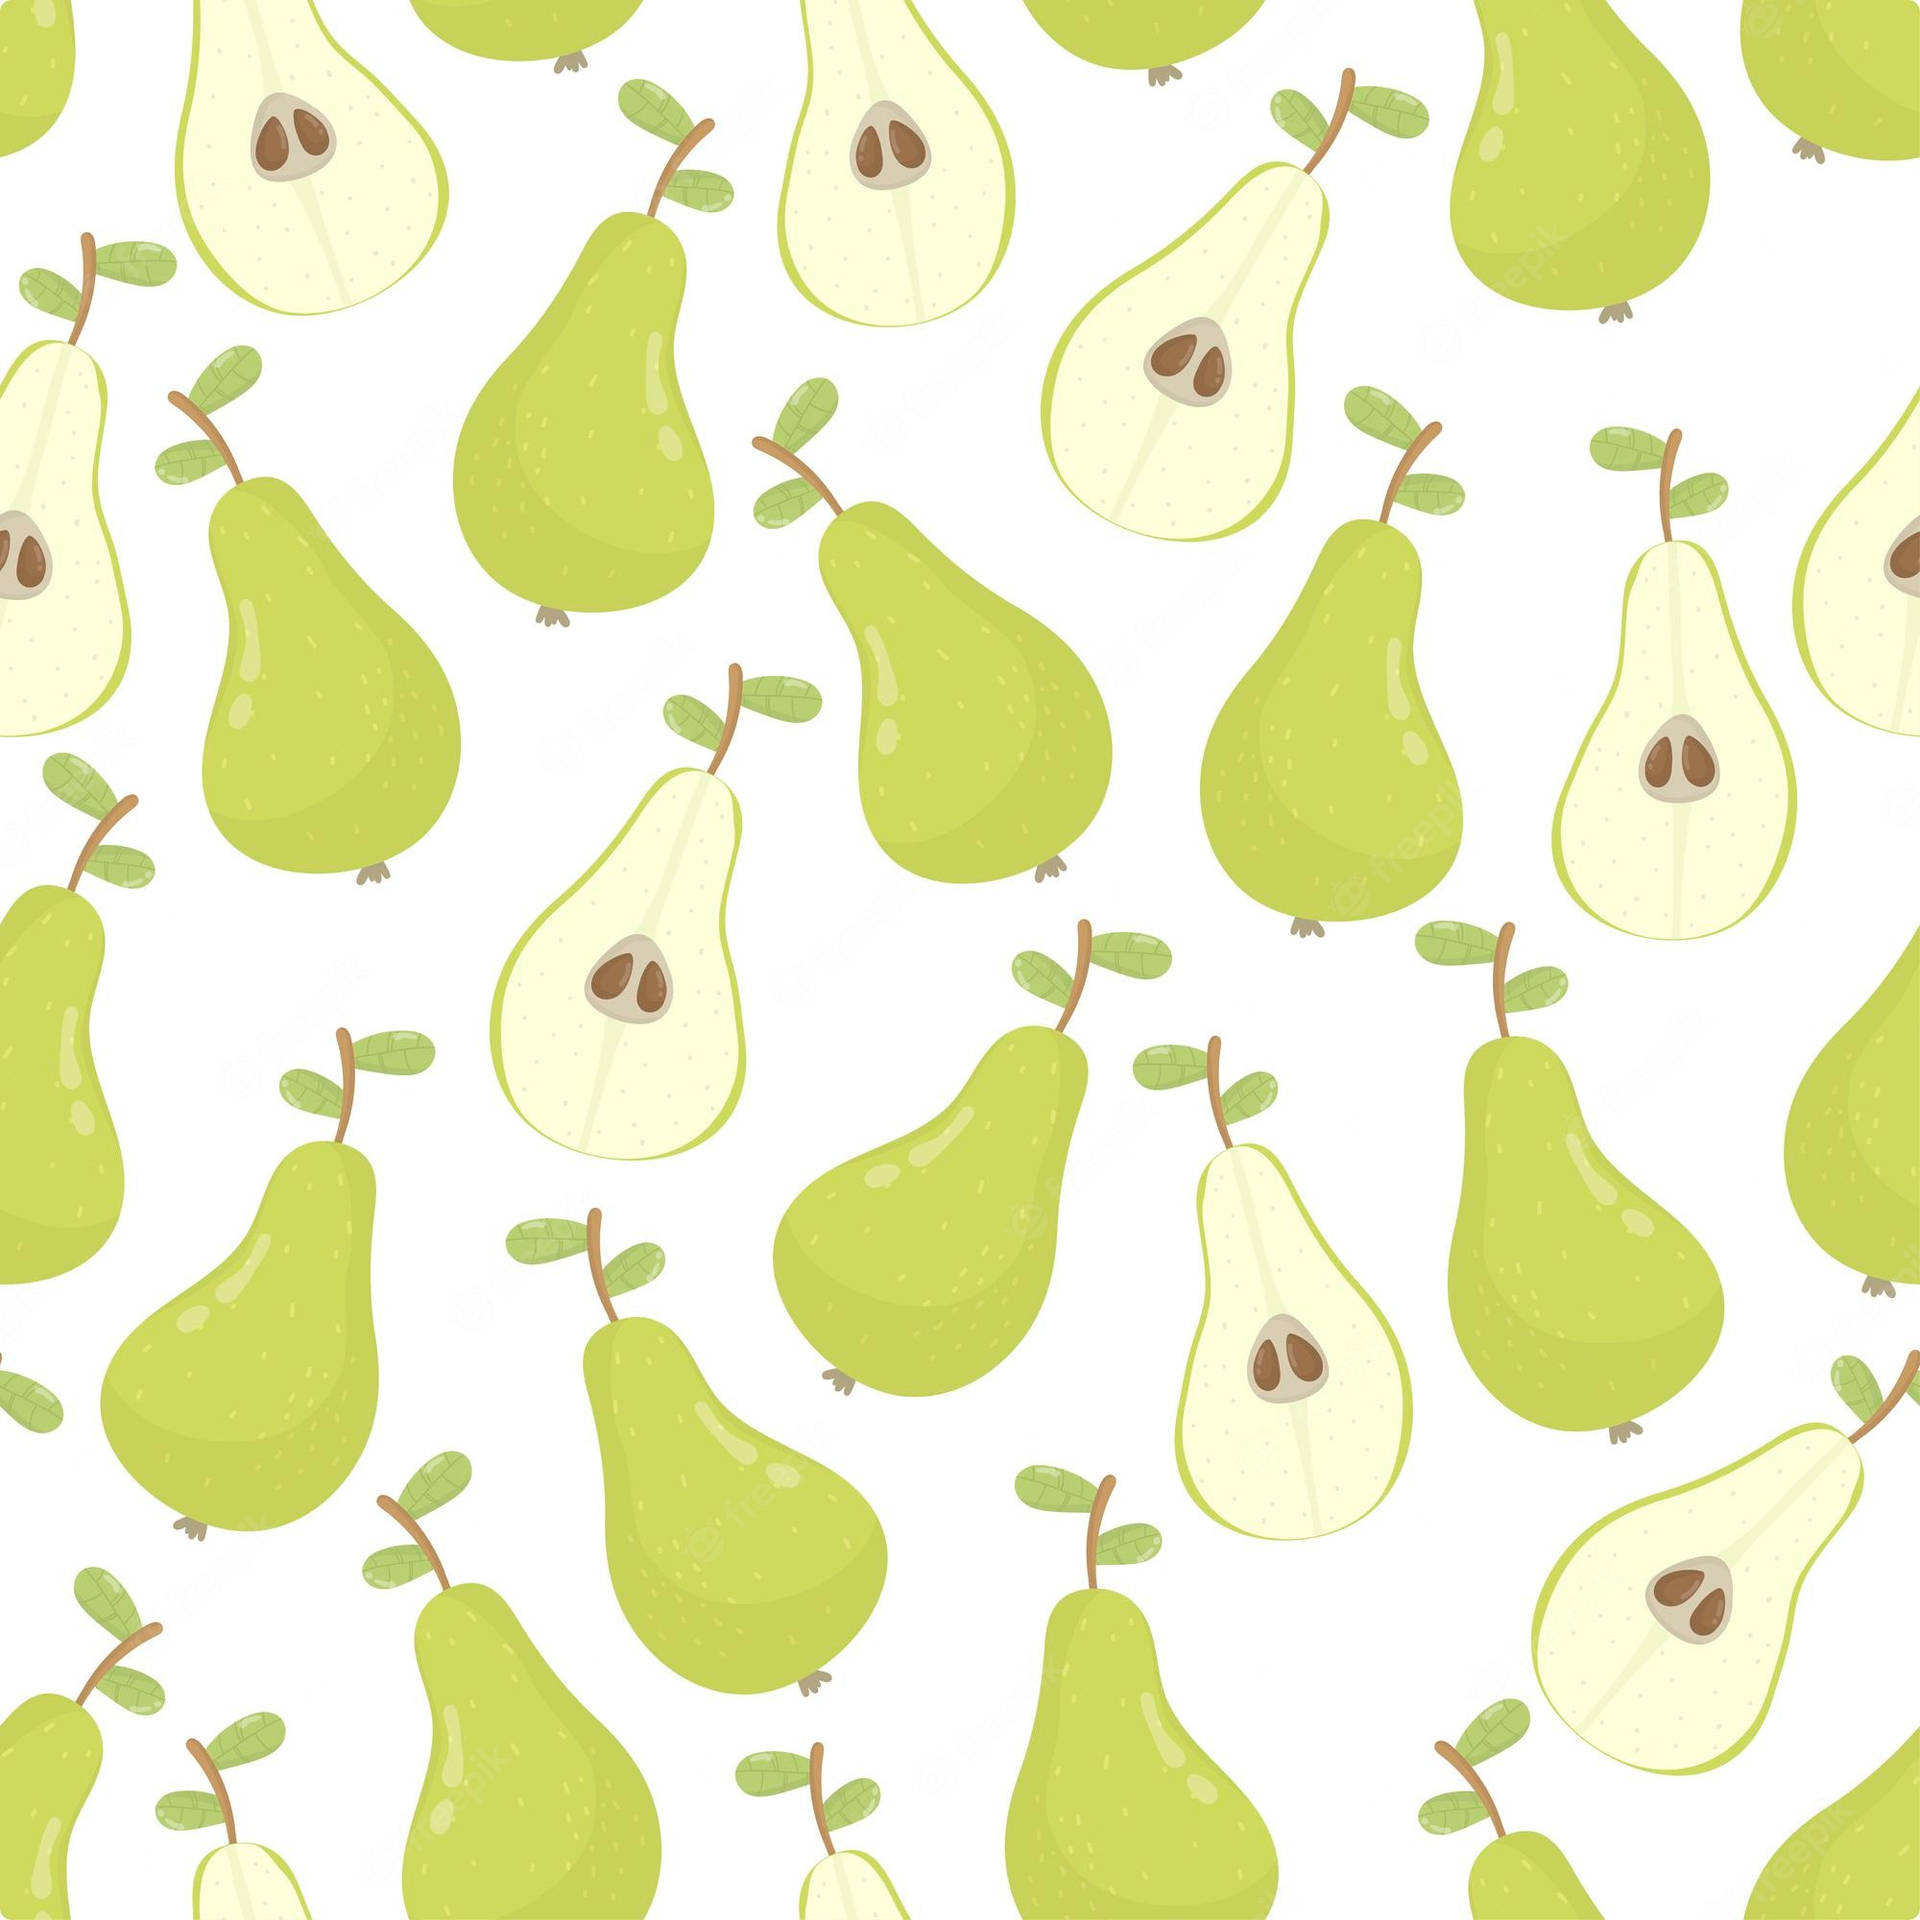 Aesthetics Slices Of Pears Poster Wallpaper